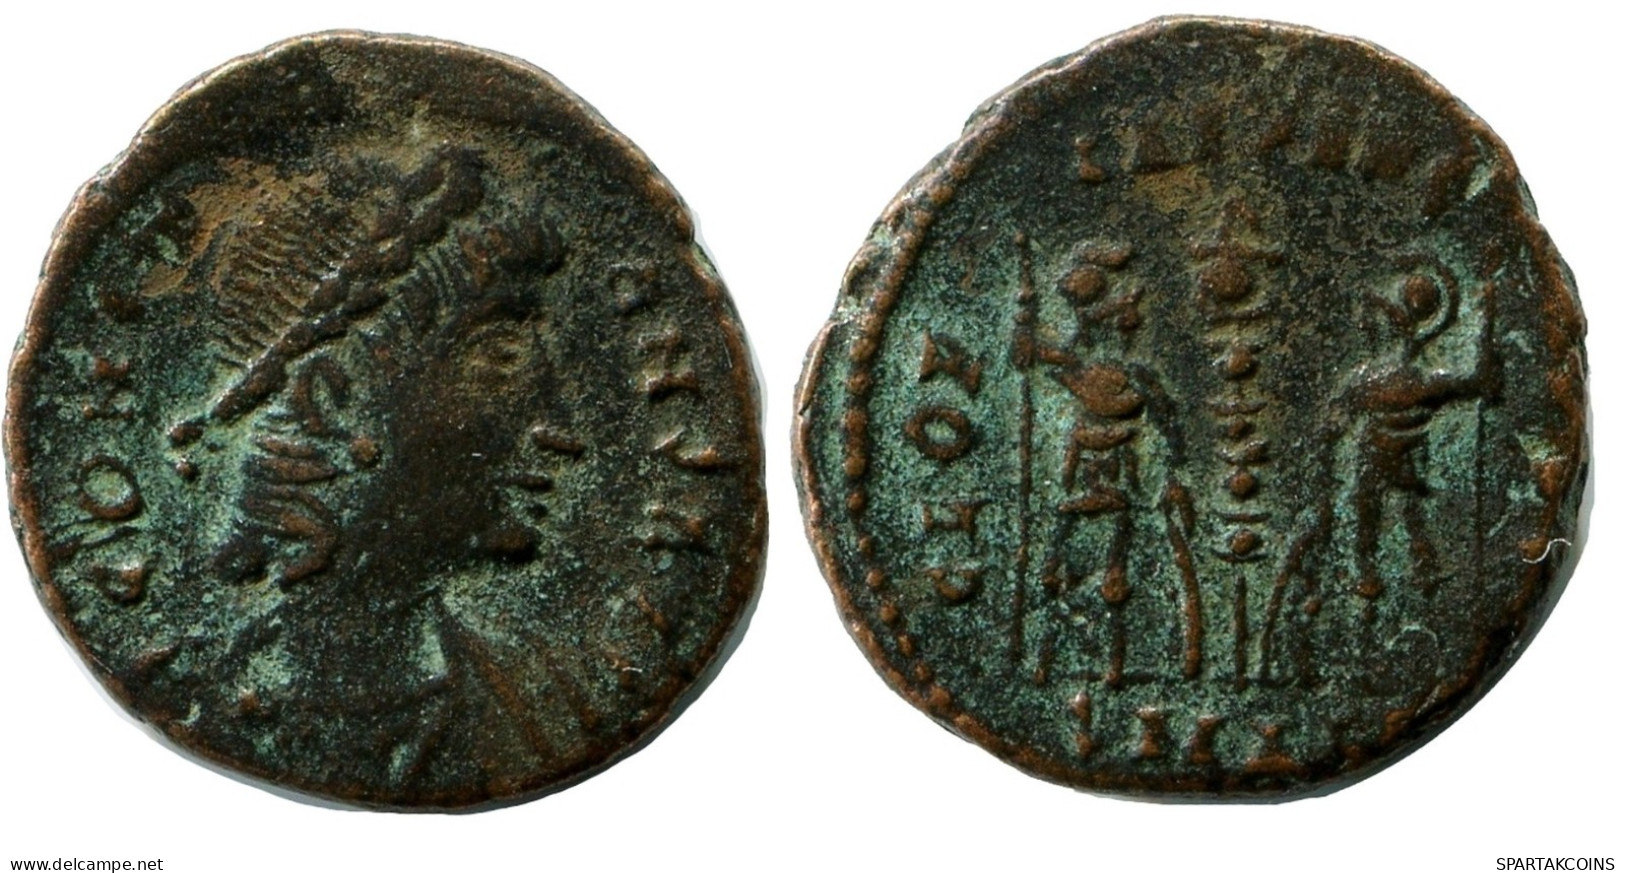 CONSTANS MINTED IN ALEKSANDRIA FROM THE ROYAL ONTARIO MUSEUM #ANC11357.14.E.A - El Imperio Christiano (307 / 363)